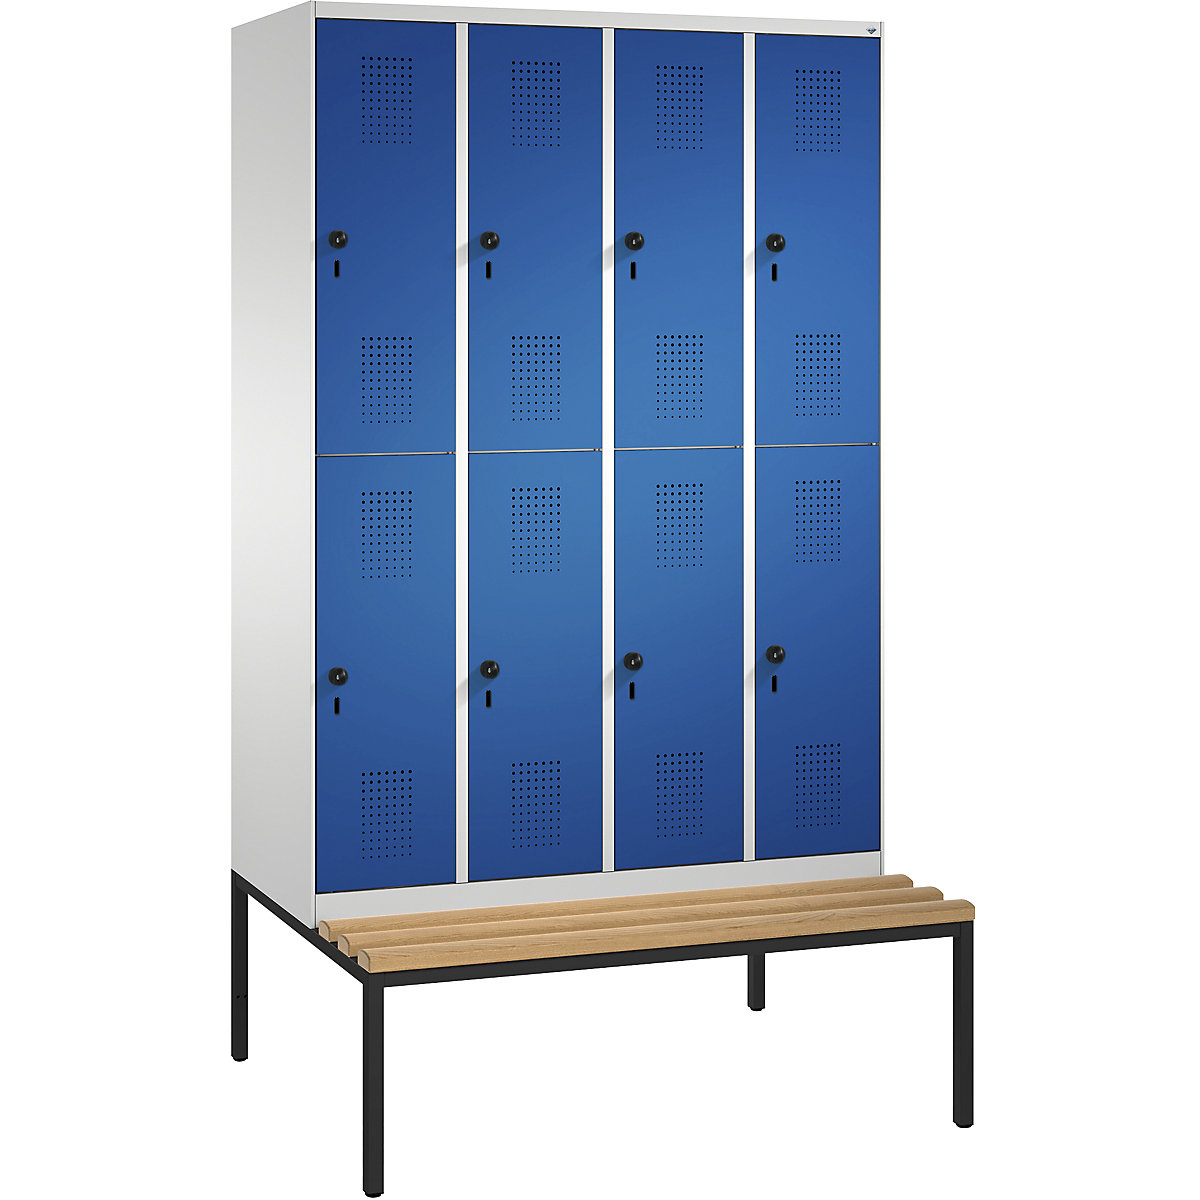 EVOLO cloakroom locker, double tier, with bench – C+P, 4 compartments, 2 shelf compartments each, compartment width 300 mm, light grey / gentian blue-6